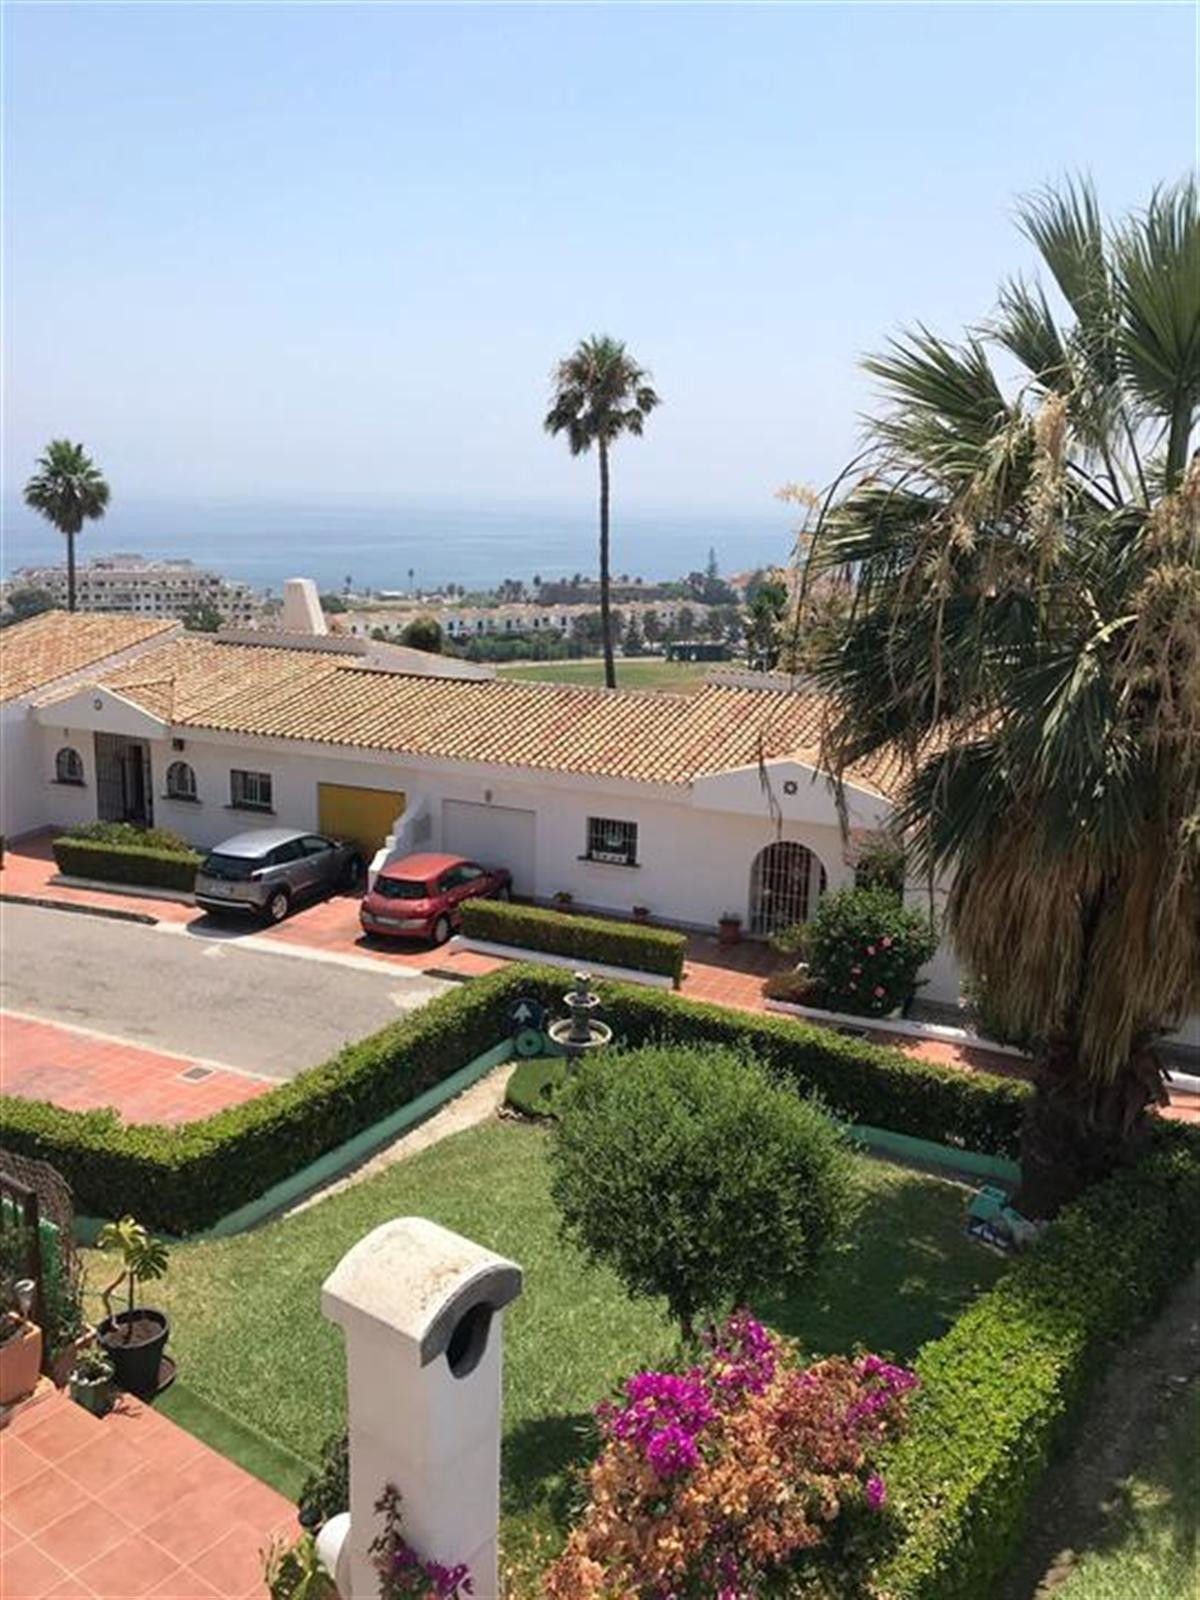 In a residential development in the Golf de la Duquesa, 4 bedroom townhouse, with 220 m2 built, 2 bathrooms, 1 toilet, living room, kitchen, a larg...